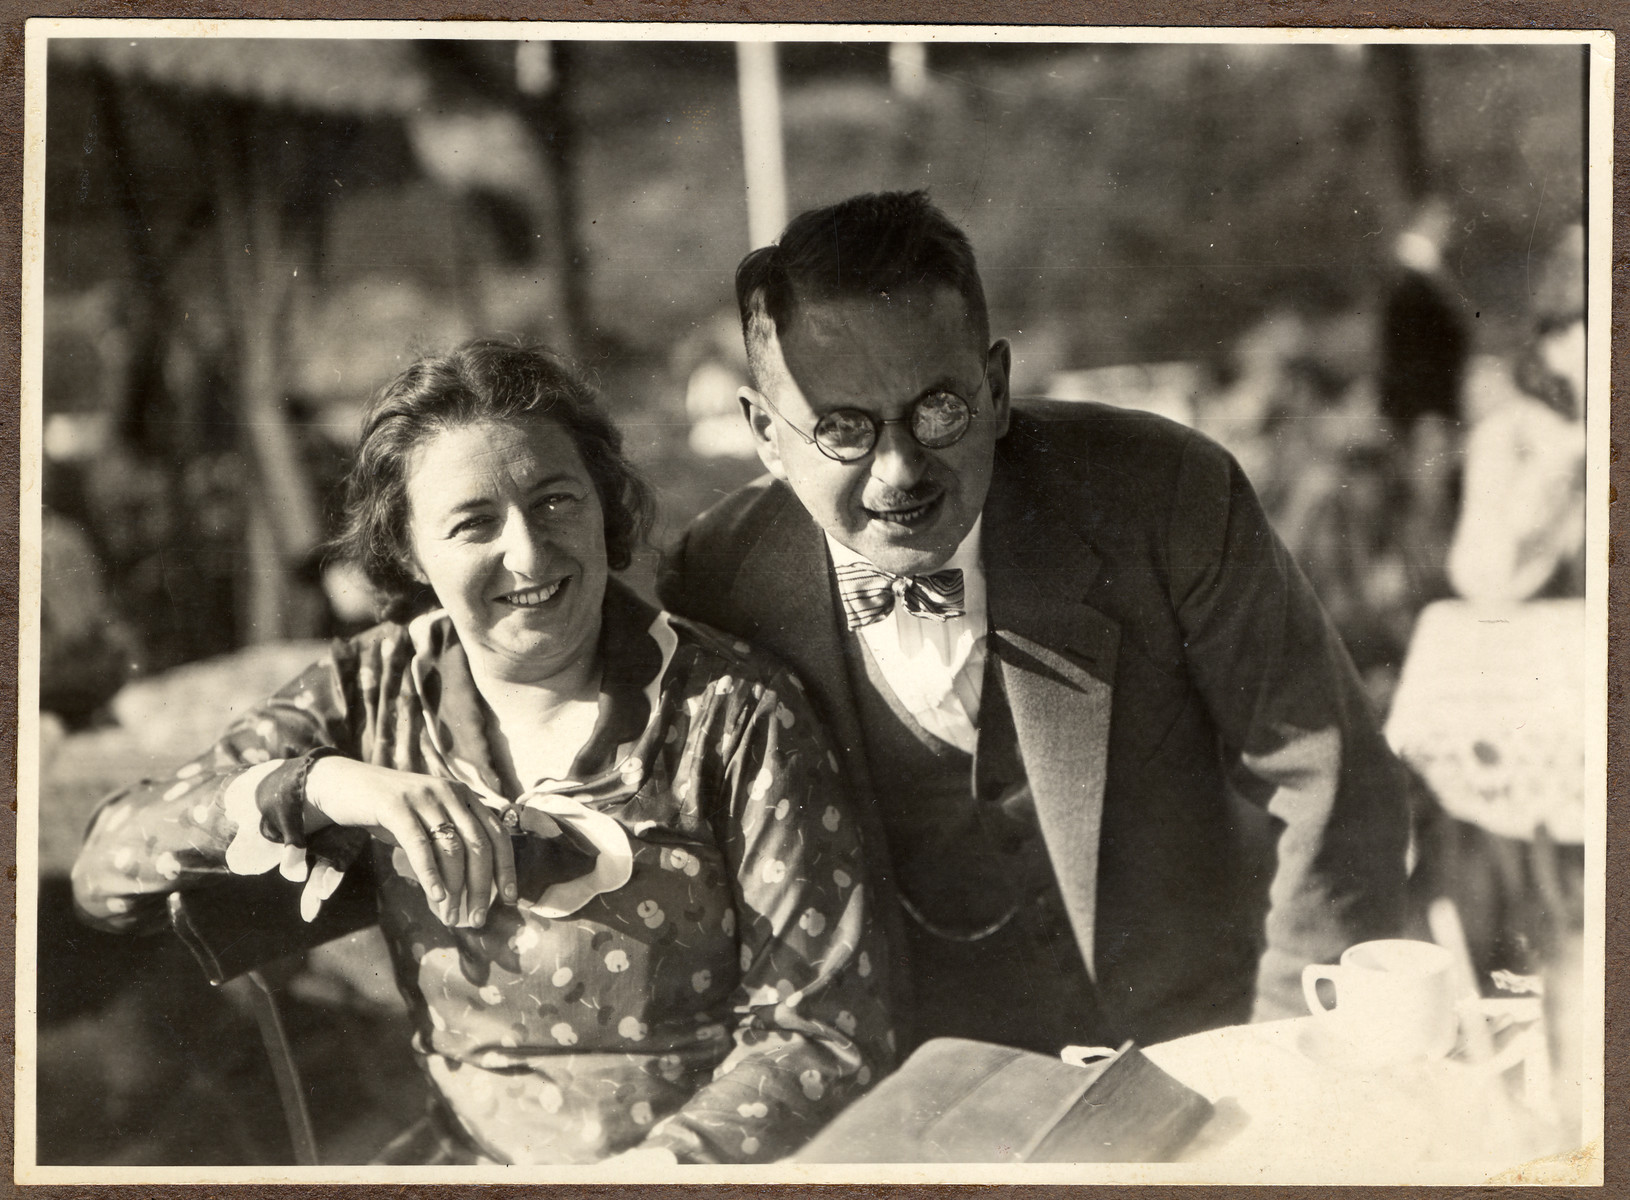 A German Jewish couple poses in an outdoor cafe.

Pictured are Dr. Hans Adolf and Augusta Bujakowksi.